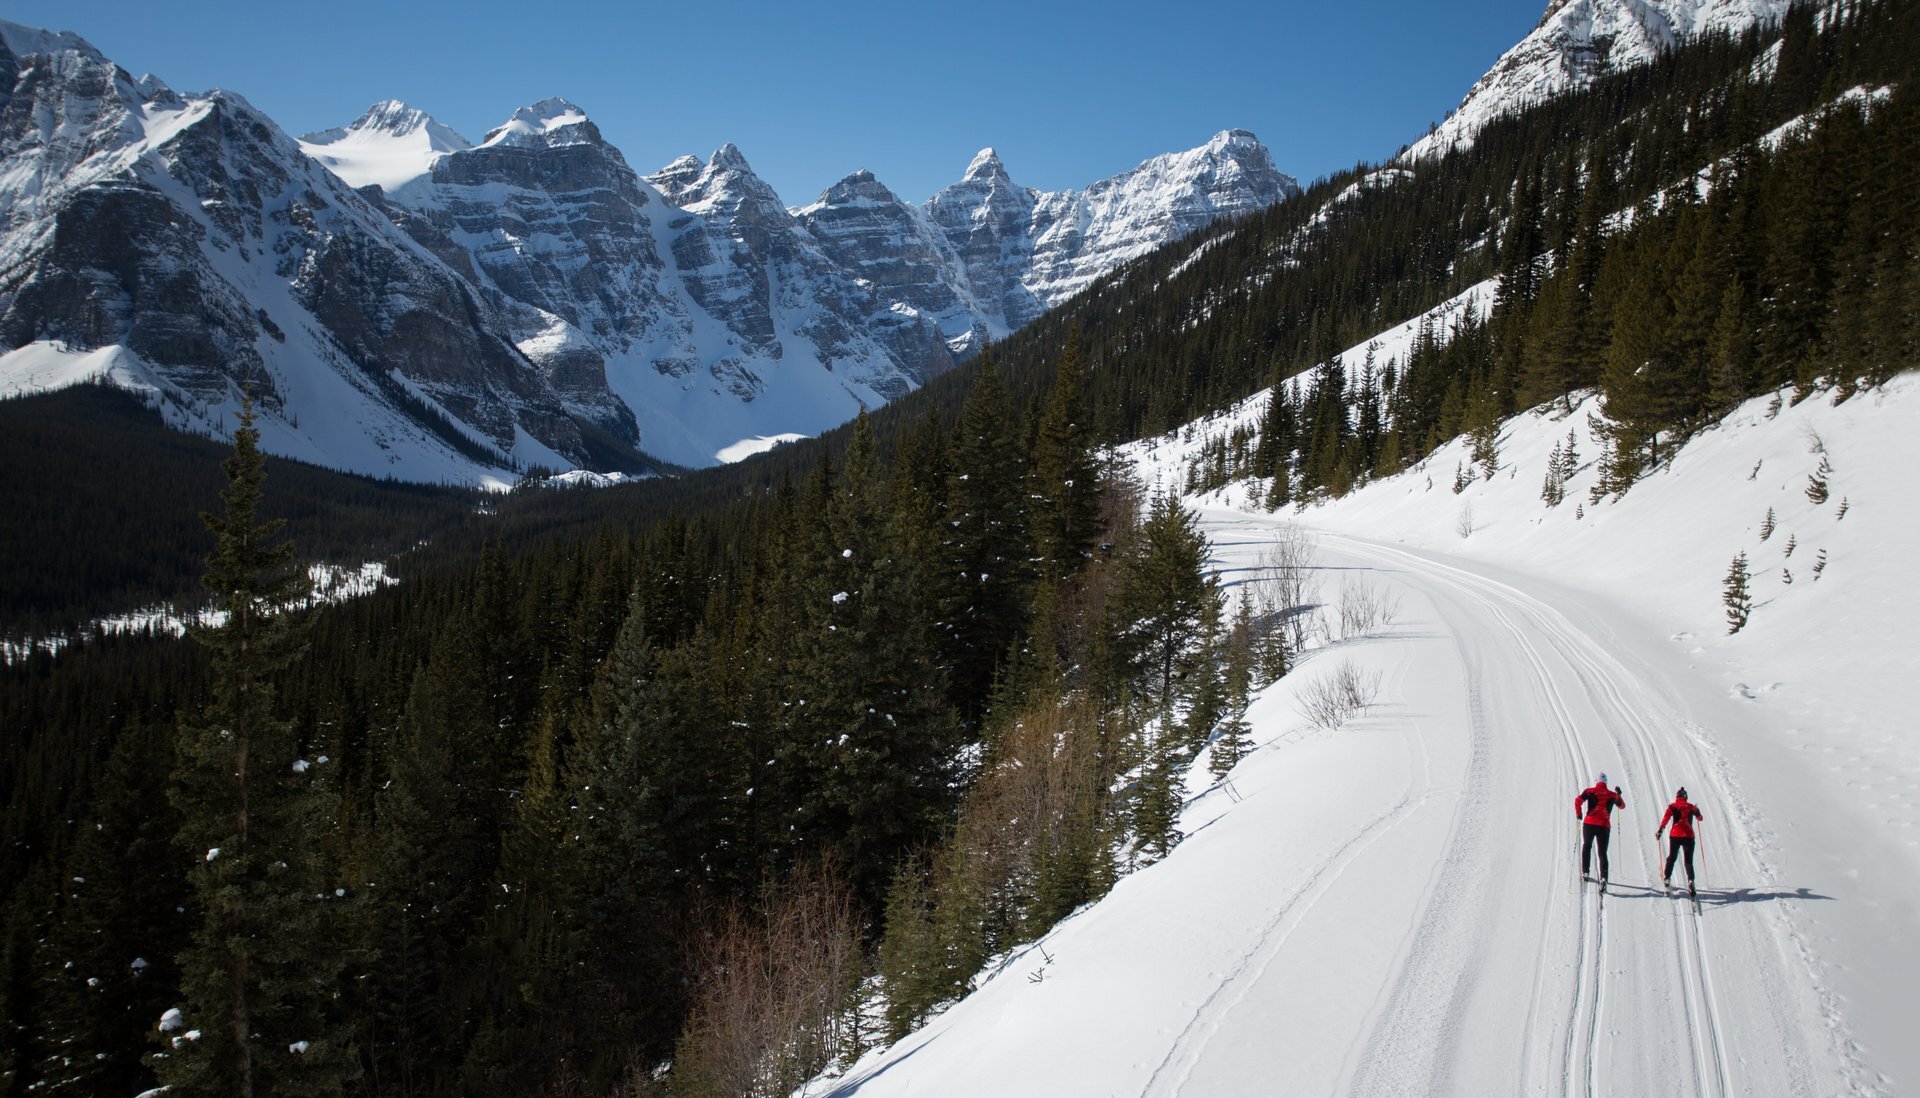 Two people cross country skiing the Moraine Lake Road in Banff National Park